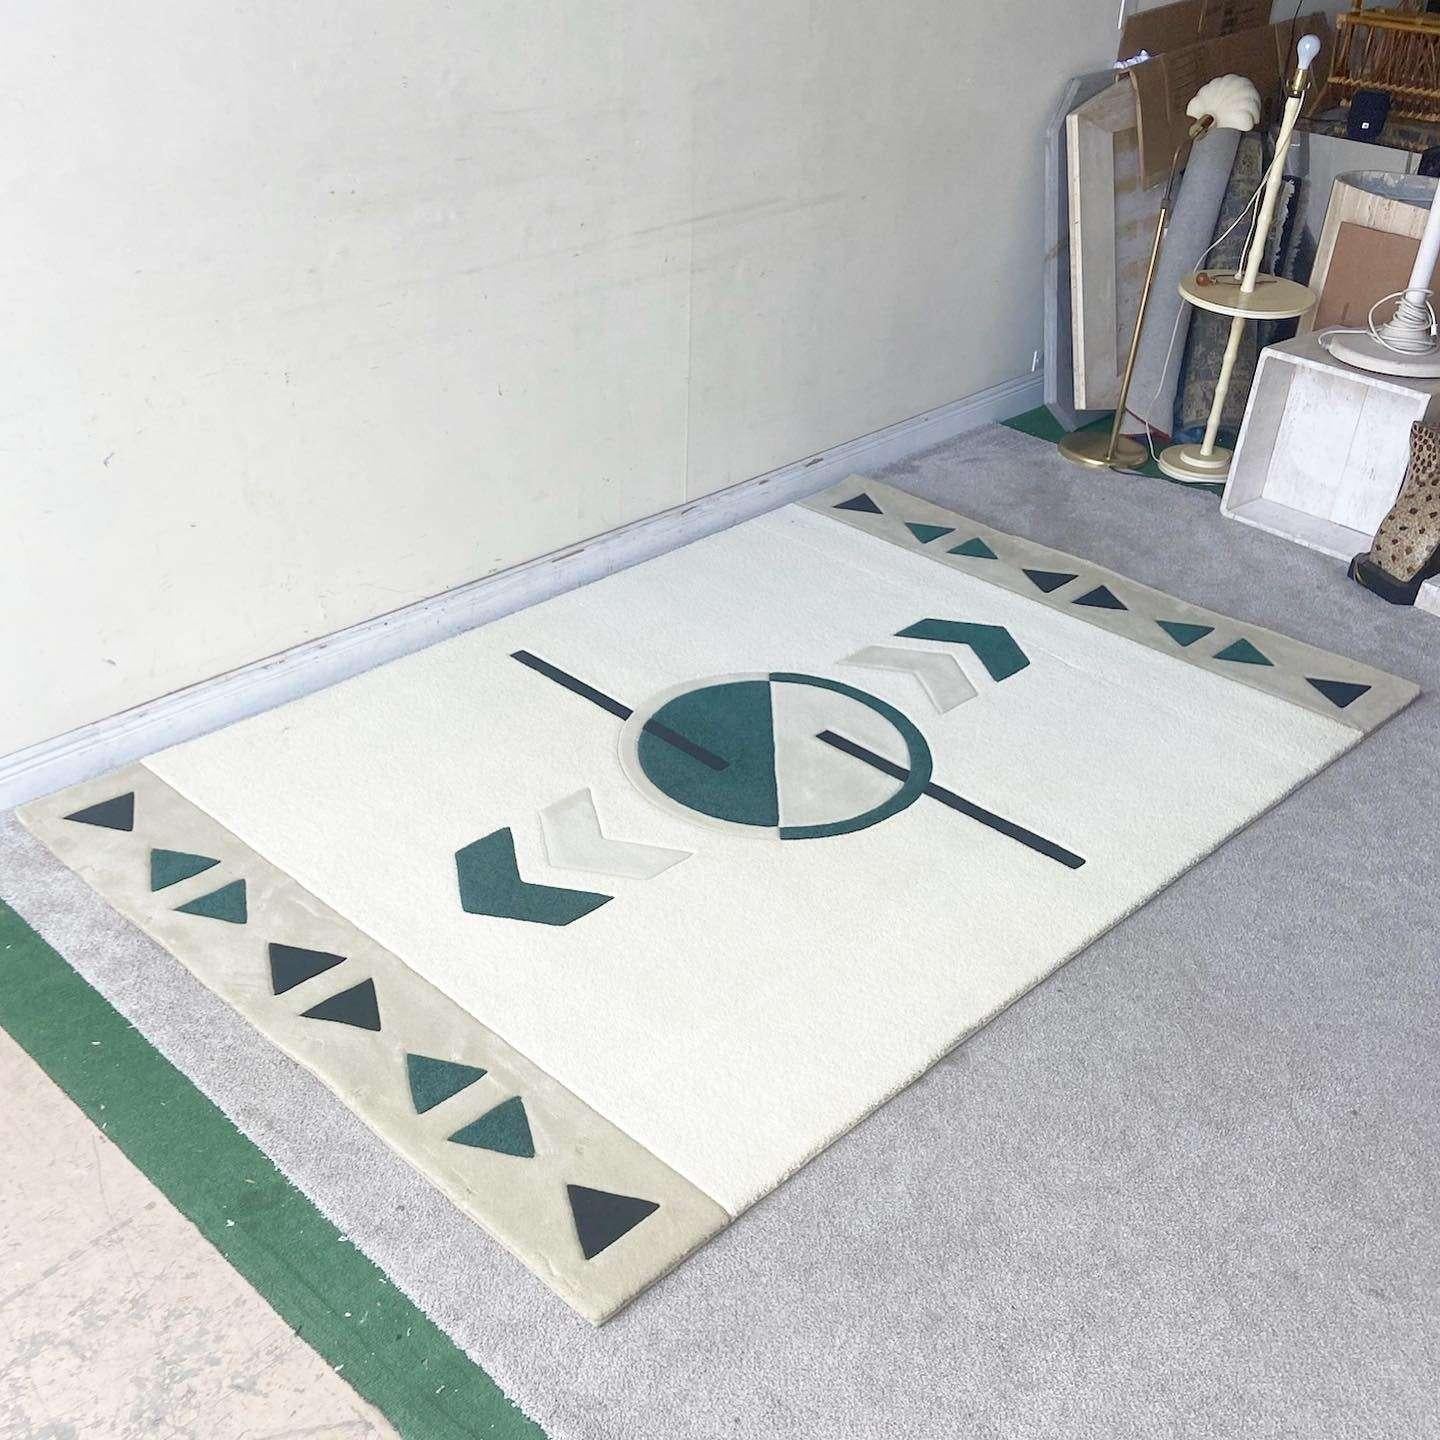 Exceptional vintage postmodern rectangular area rug. Features a green and beige design within the cream center rectangle. Bordering both sides of the rug is a tan rectangle with alternating shades of green triangles.

Rug 28
